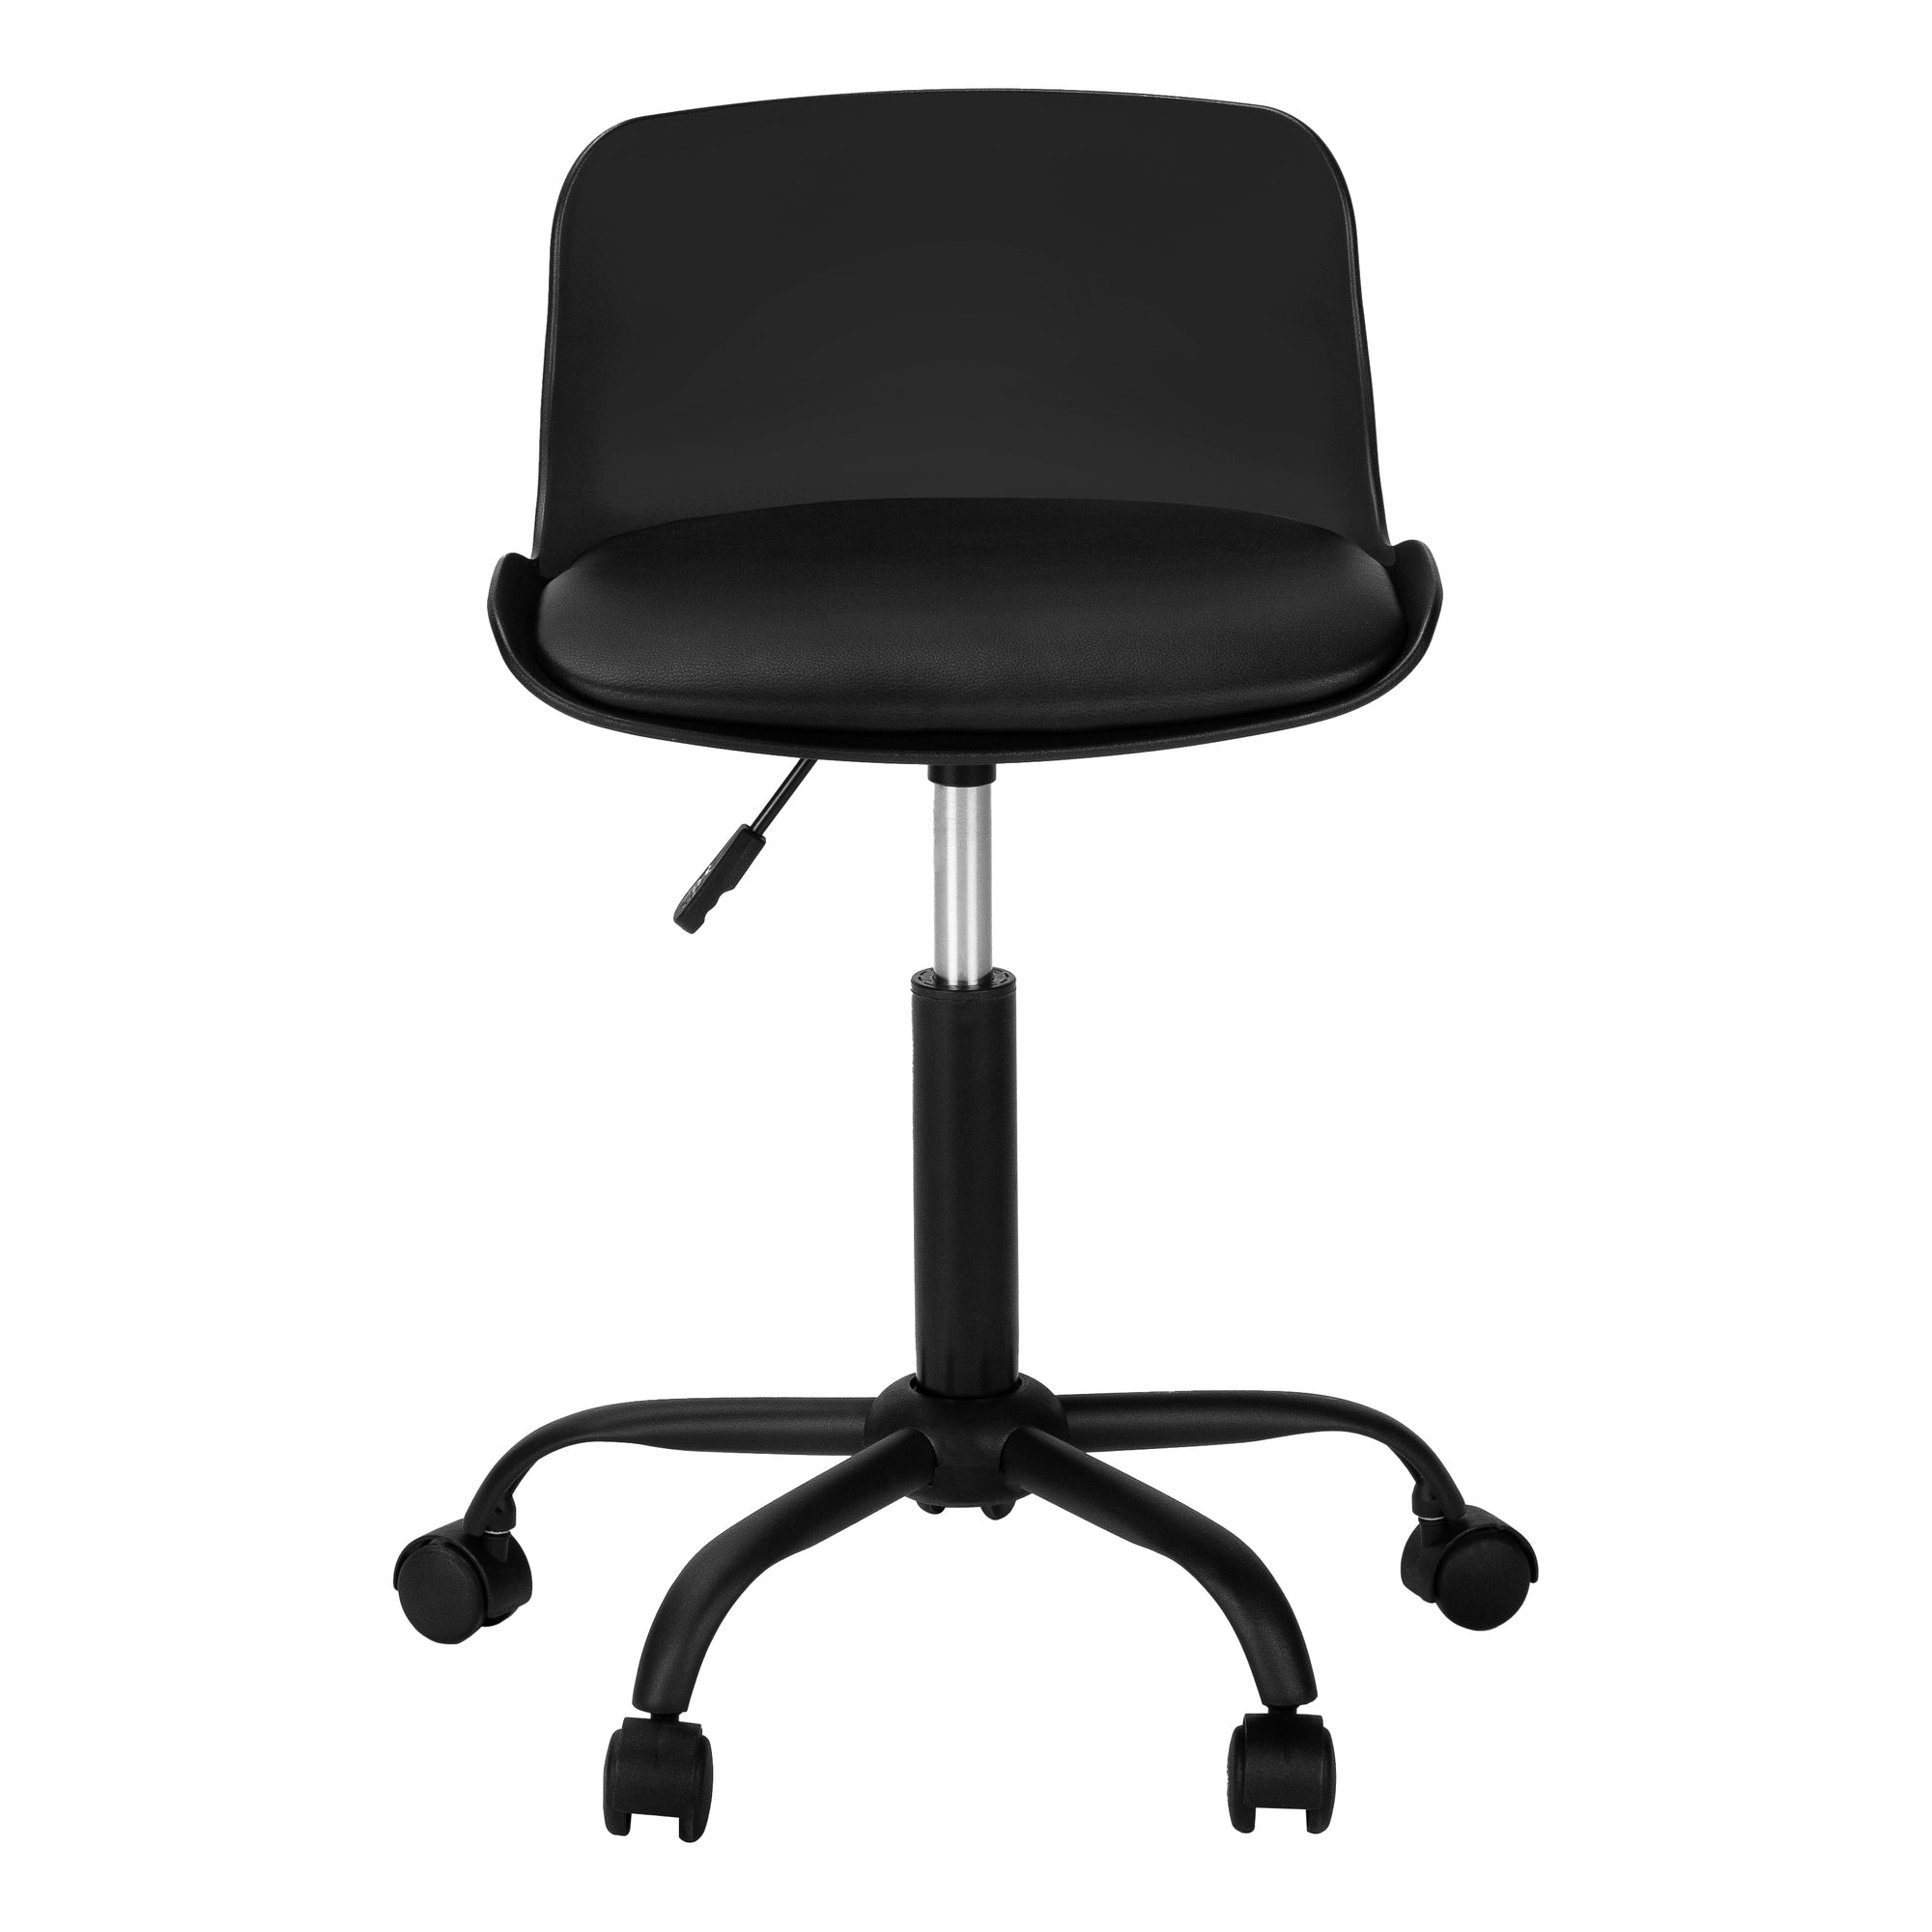 MN-257464    Office Chair - Juvenile Low Back - Adjustable Height - Black